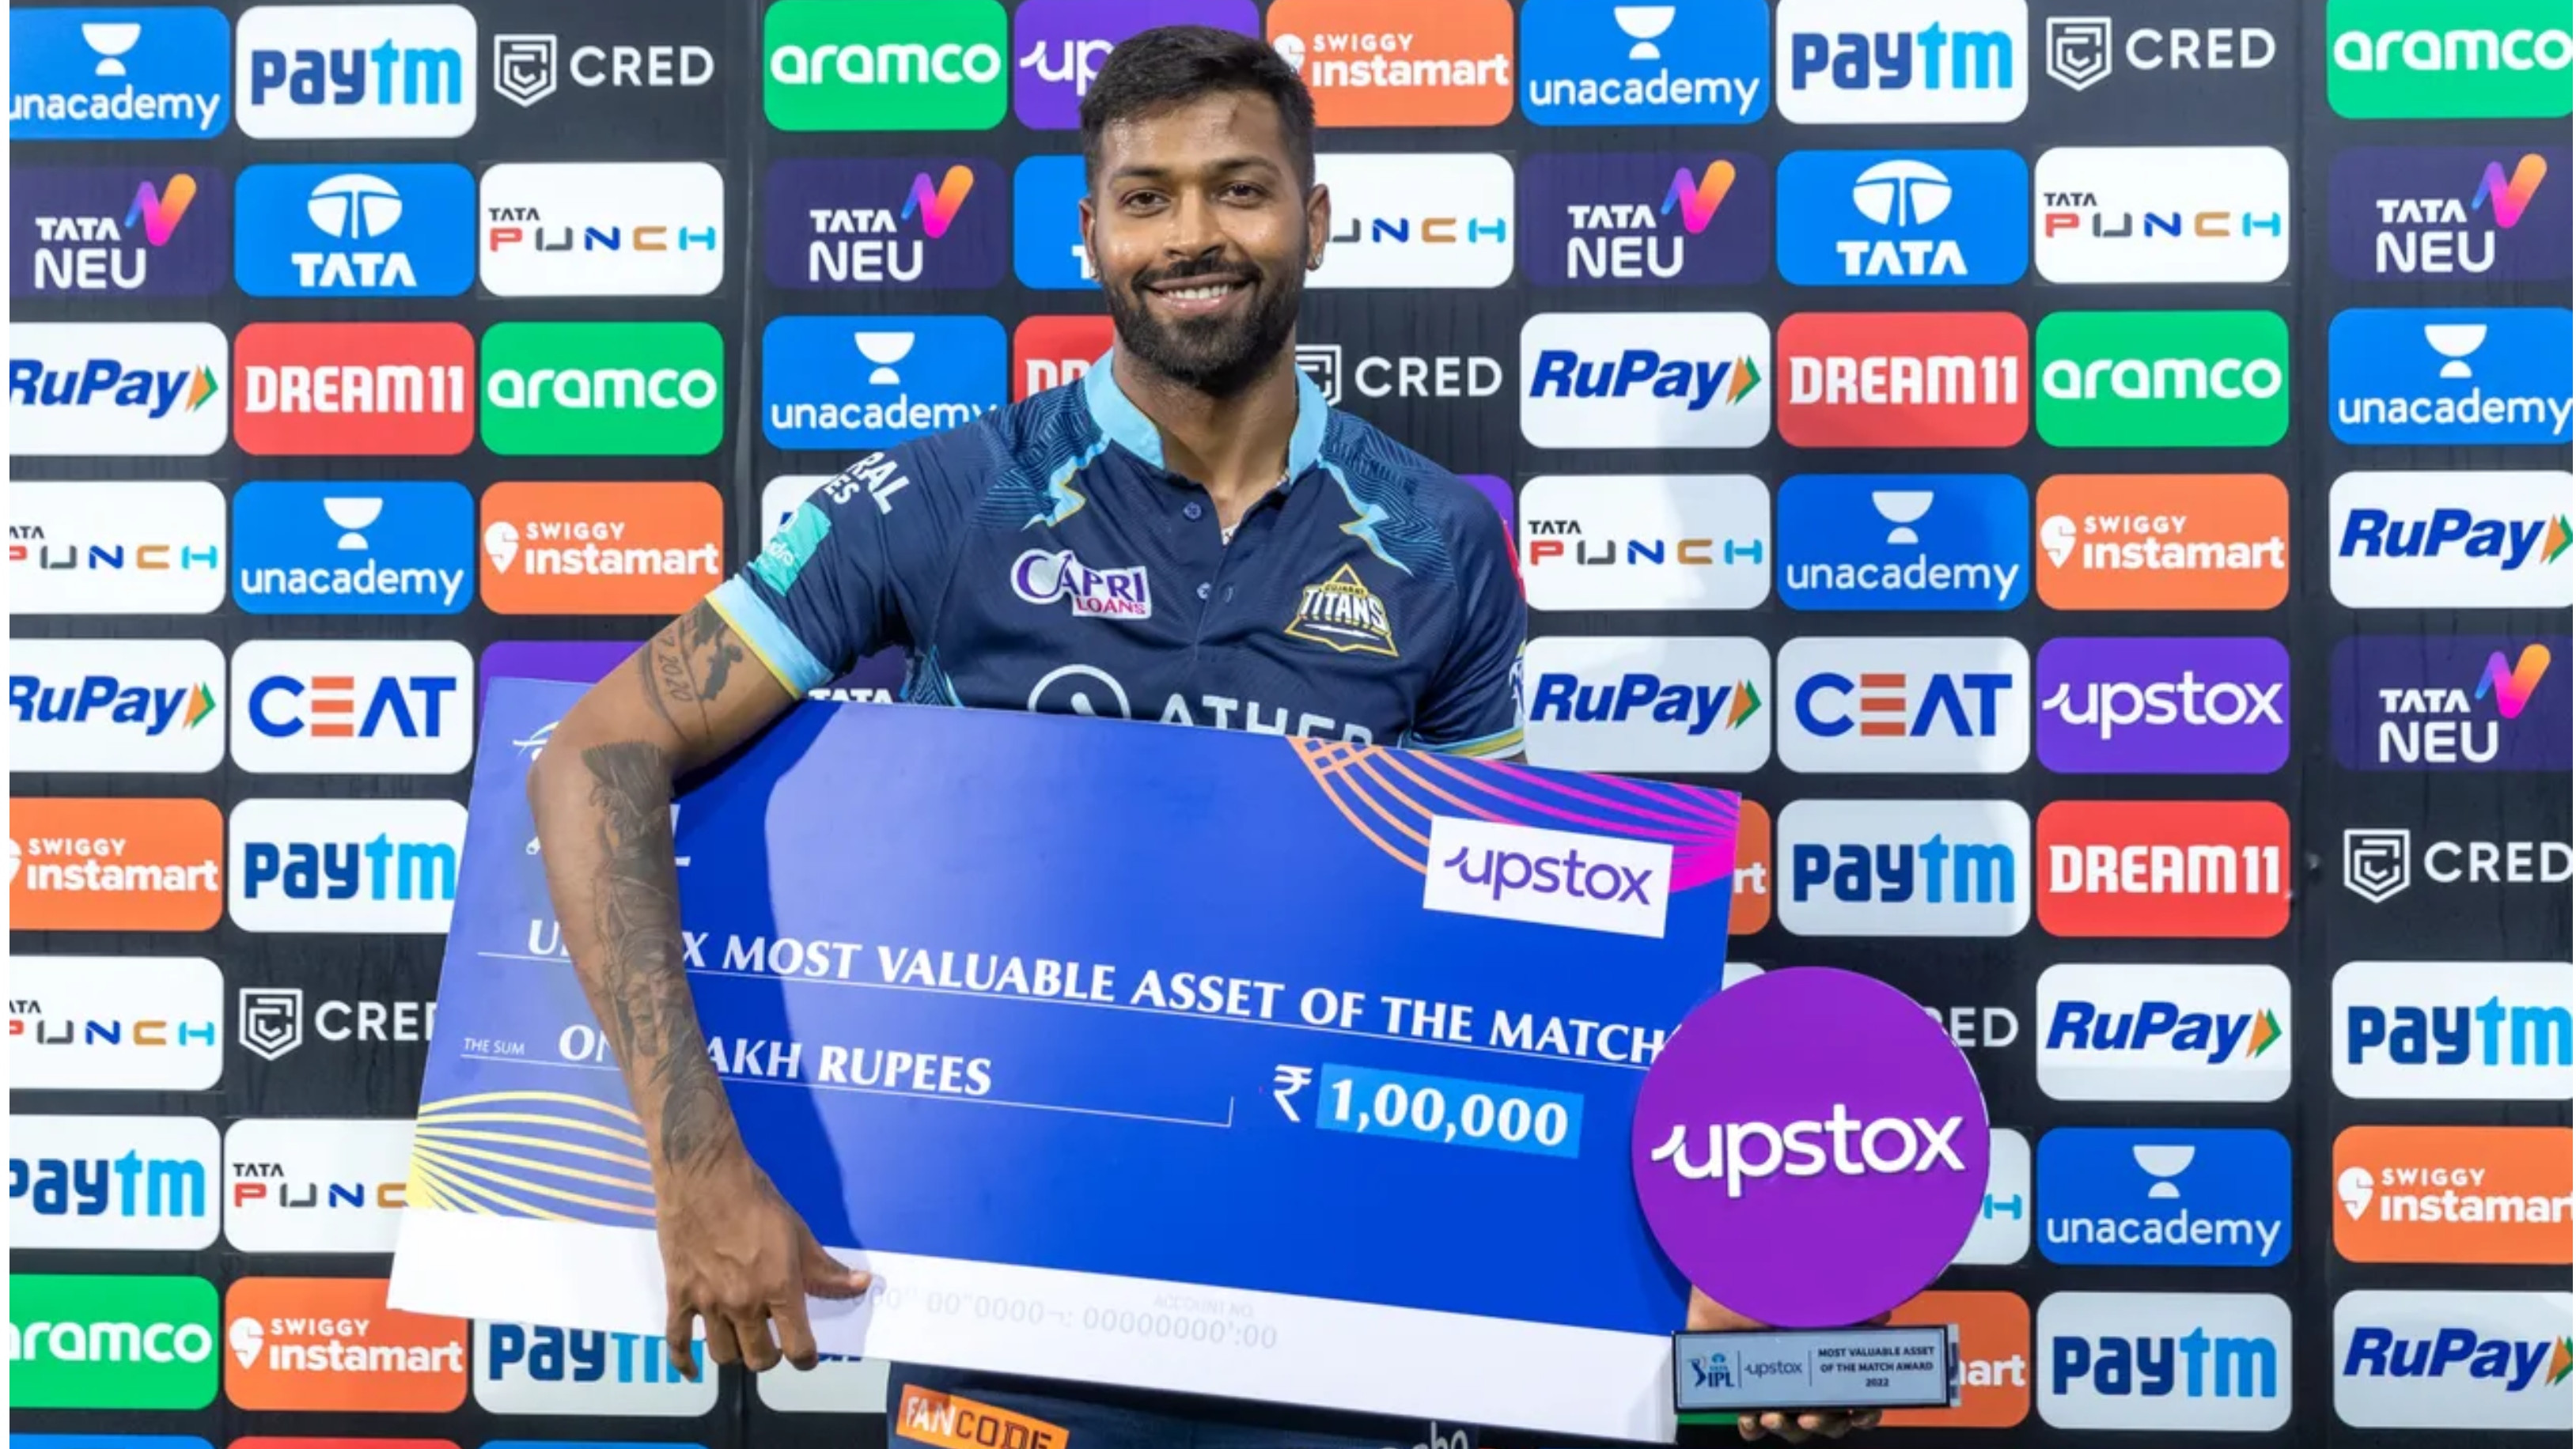 IPL 2022: “At the moment, I am playing IPL and will focus on IPL”, Hardik Pandya not thinking about India return